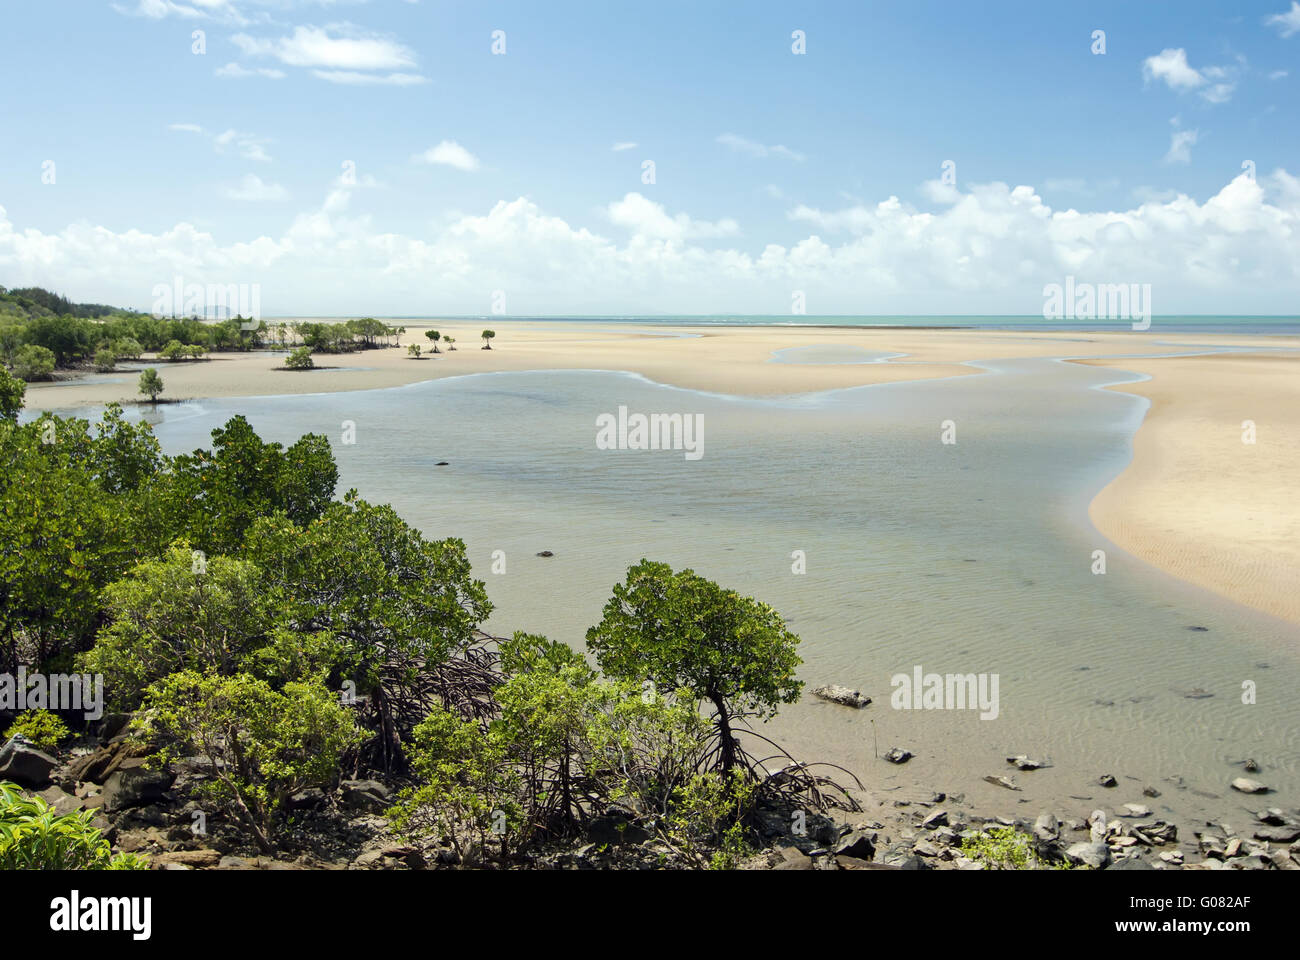 Low Tide at the Beach with Mangroves and a Lagoon Stock Photo